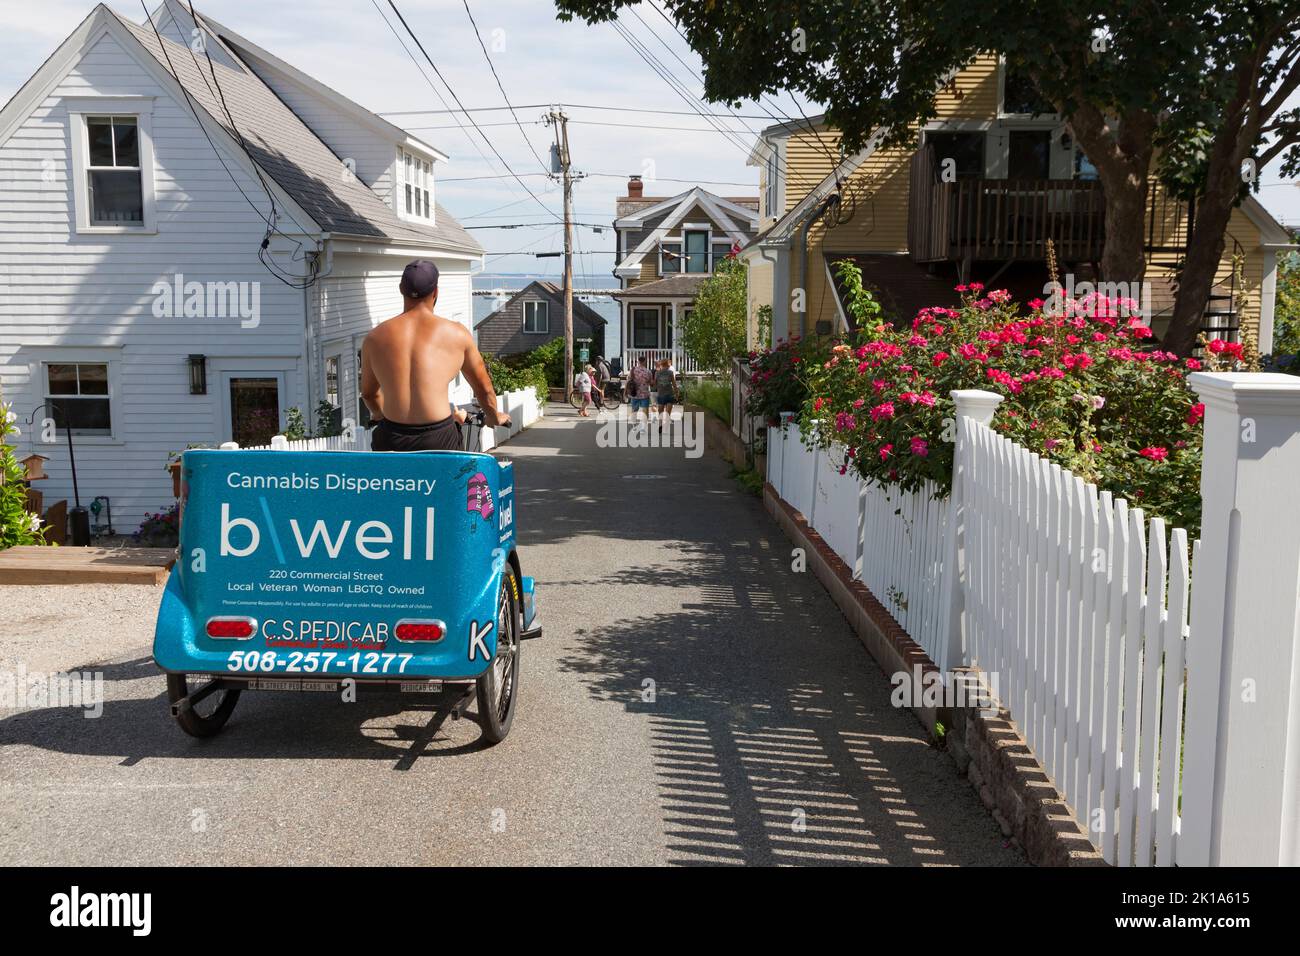 Pedicab driver making a cannabis dispensary delivery in Provincetown, Cape Cod, Massachusetts. Stock Photo